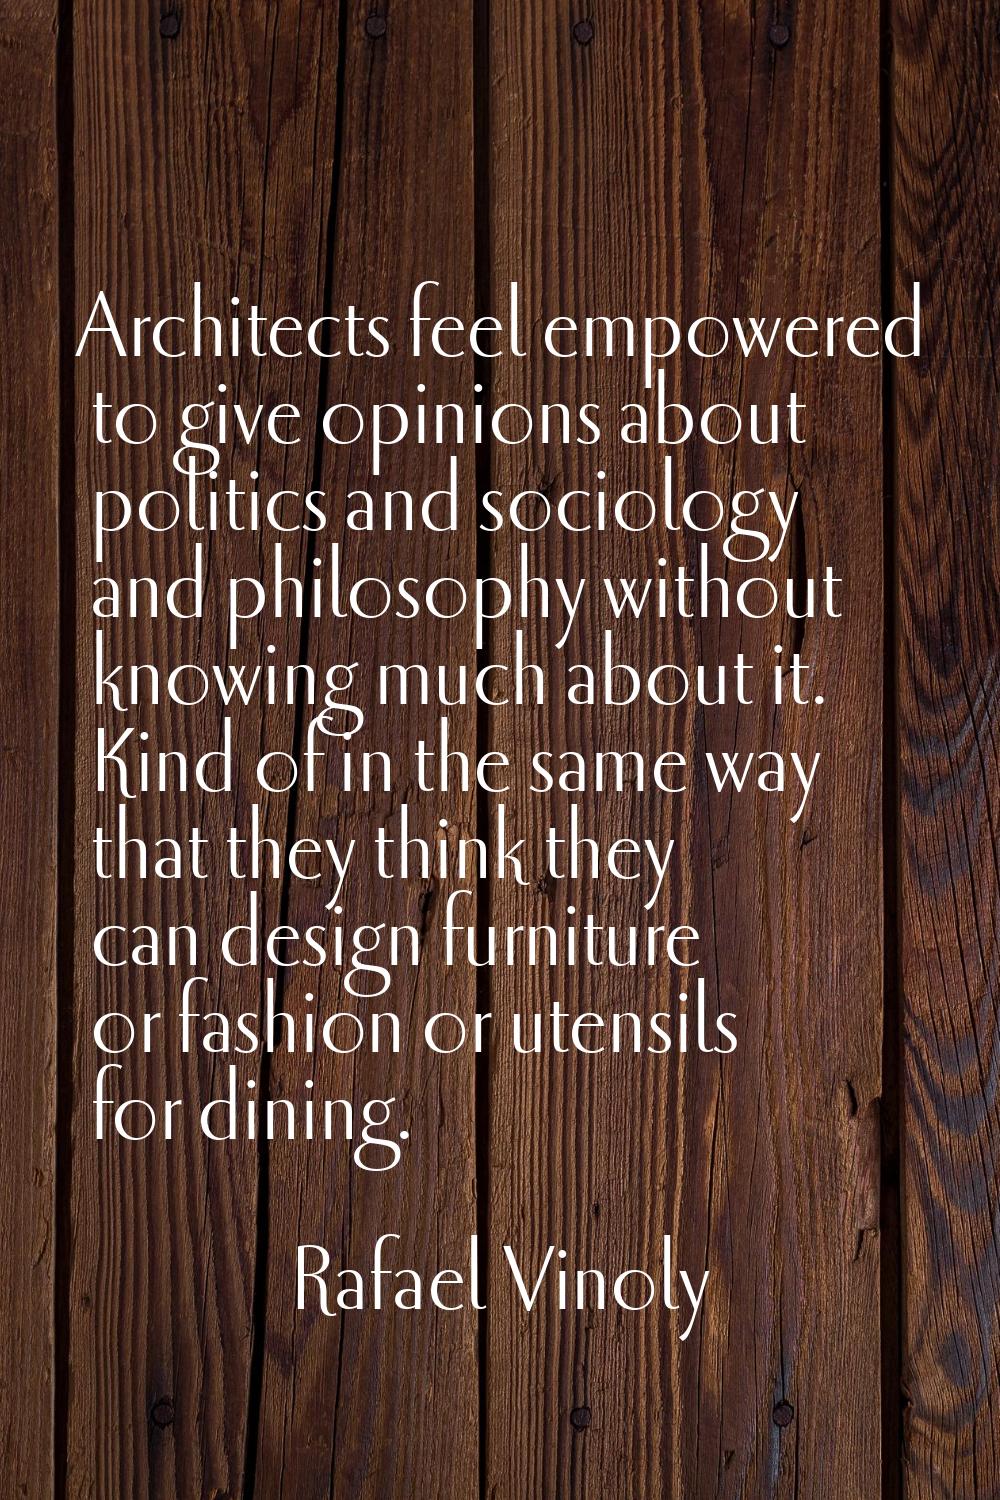 Architects feel empowered to give opinions about politics and sociology and philosophy without know